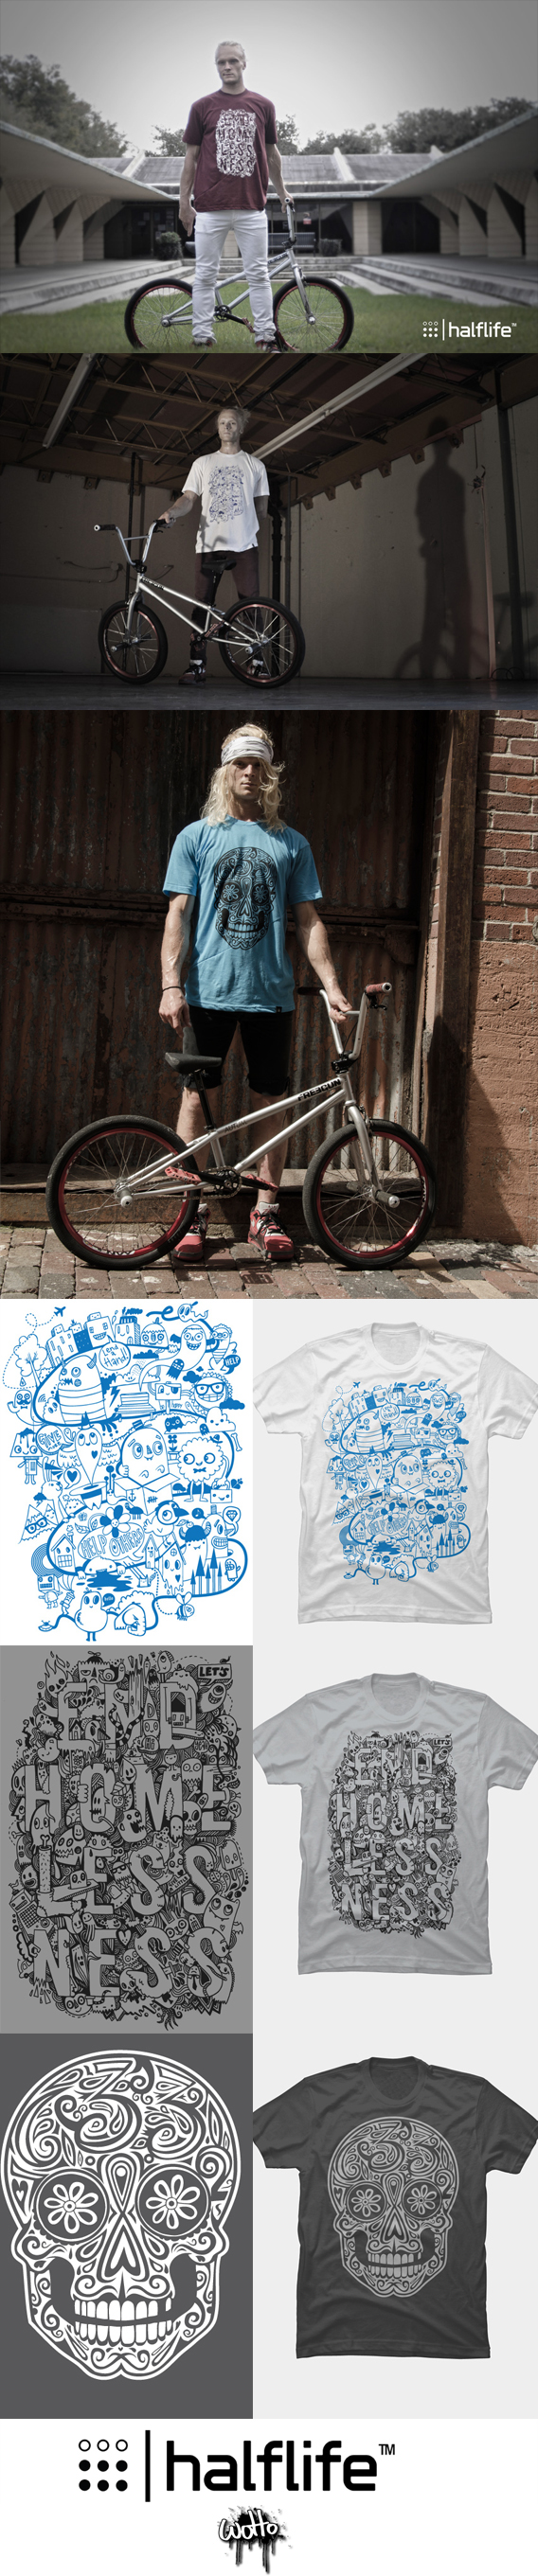 homelessness charity tees t-shirt wotto skull doodles Unique bmx cool